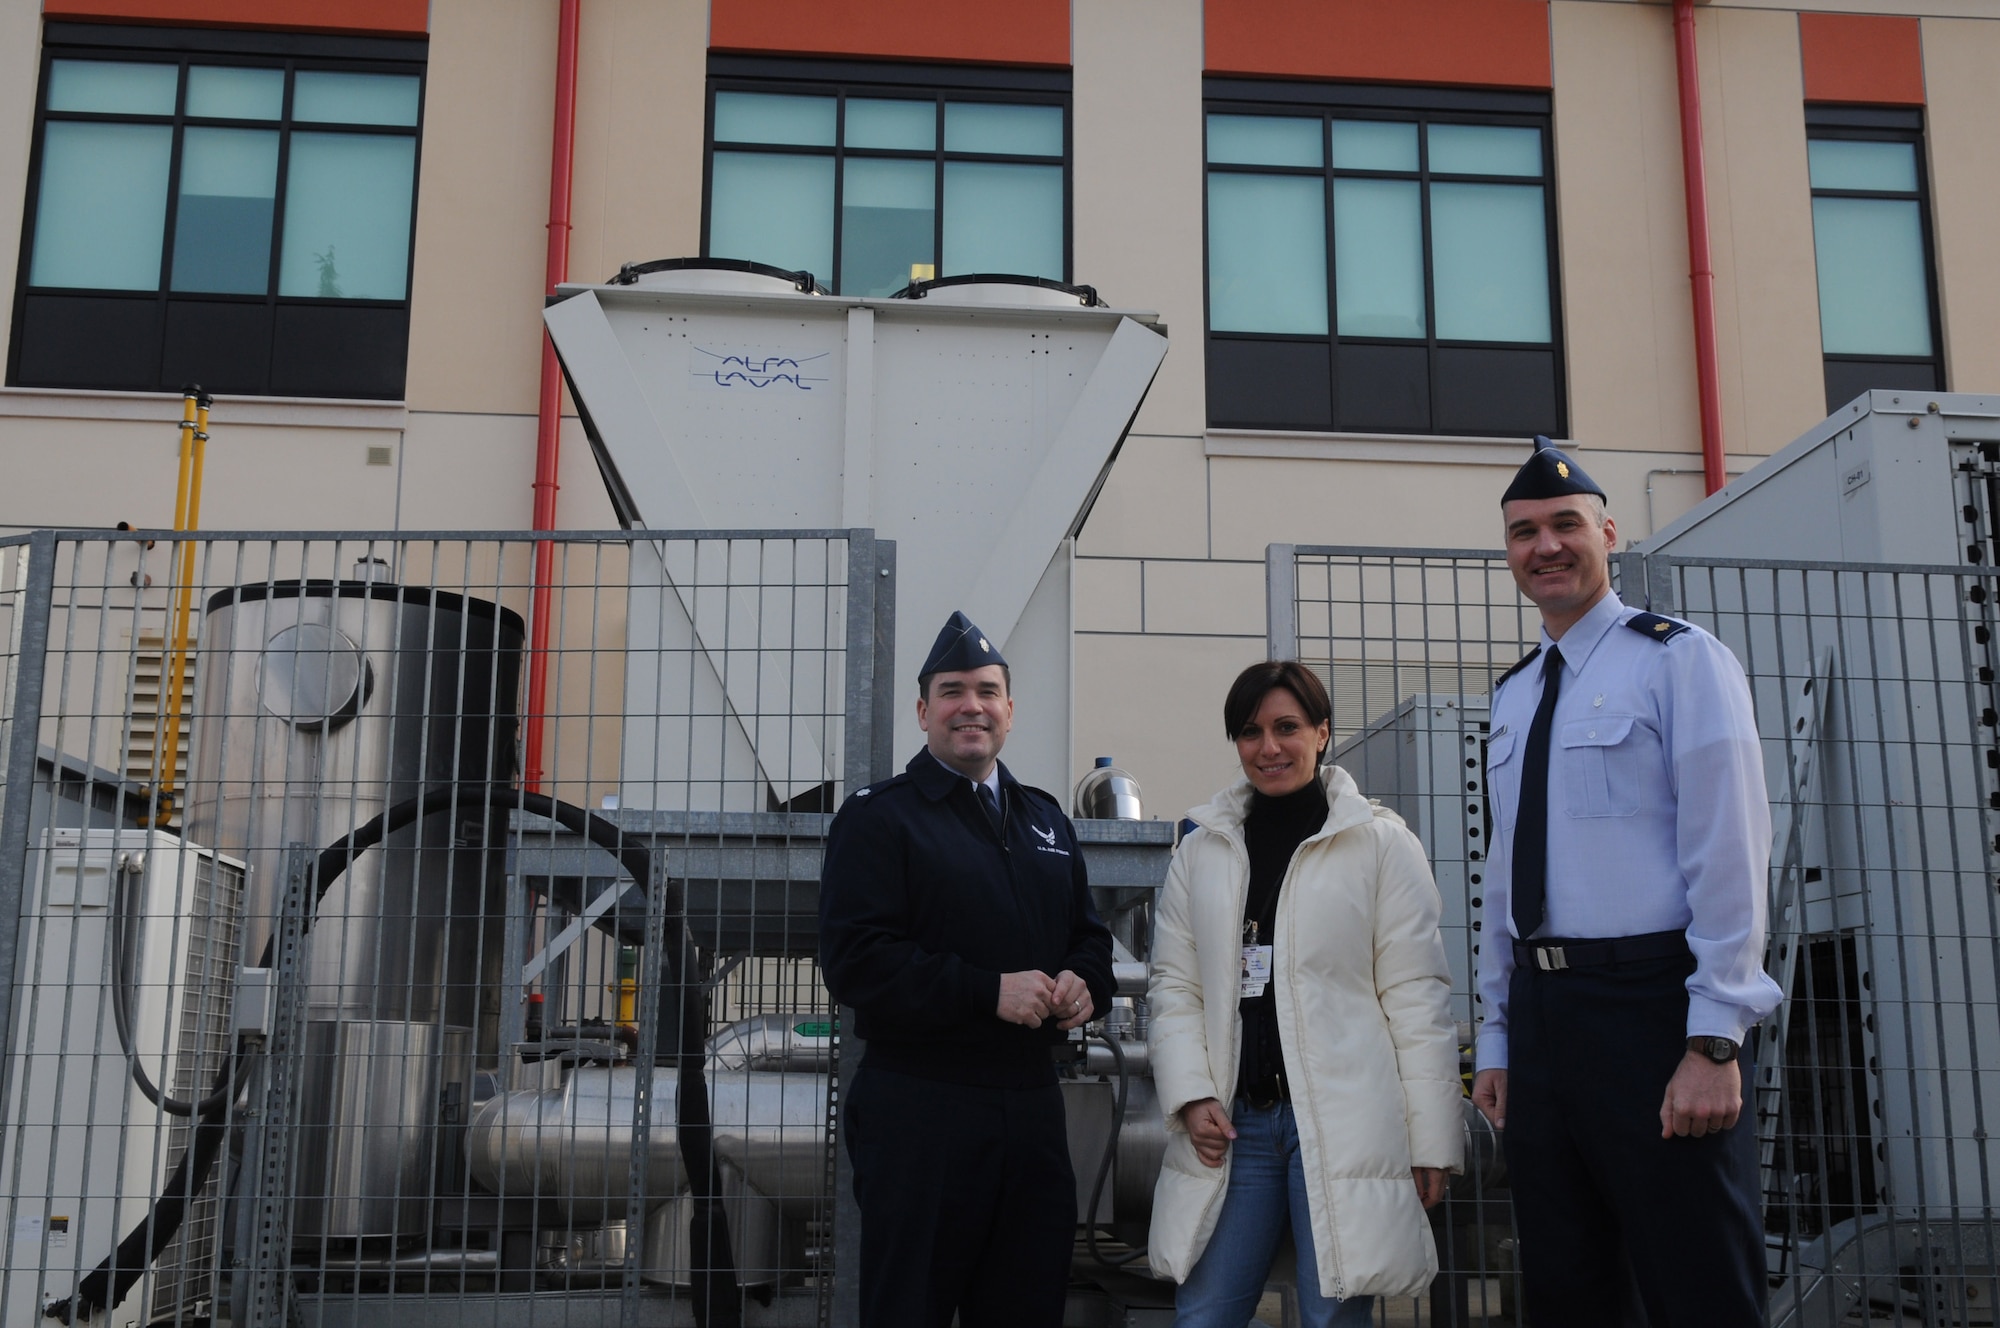 Lt. Col. John Savage, 31st Medical Support Squadron commander, Manuela Solda, 31st Medical facility manager and Maj. James Robertson, 31st MDSS medical logistics flight commander, stand in front of the equipment that earned them the ENERGY STAR recognition.  Aviano hospital recently received the Environmental Protection Agency's ENERGY STAR rating. The rating is a national symbol for superior energy and environmental protection.  (U.S. Air Force photo/Staff Sgt. Mercedes Crossland) 